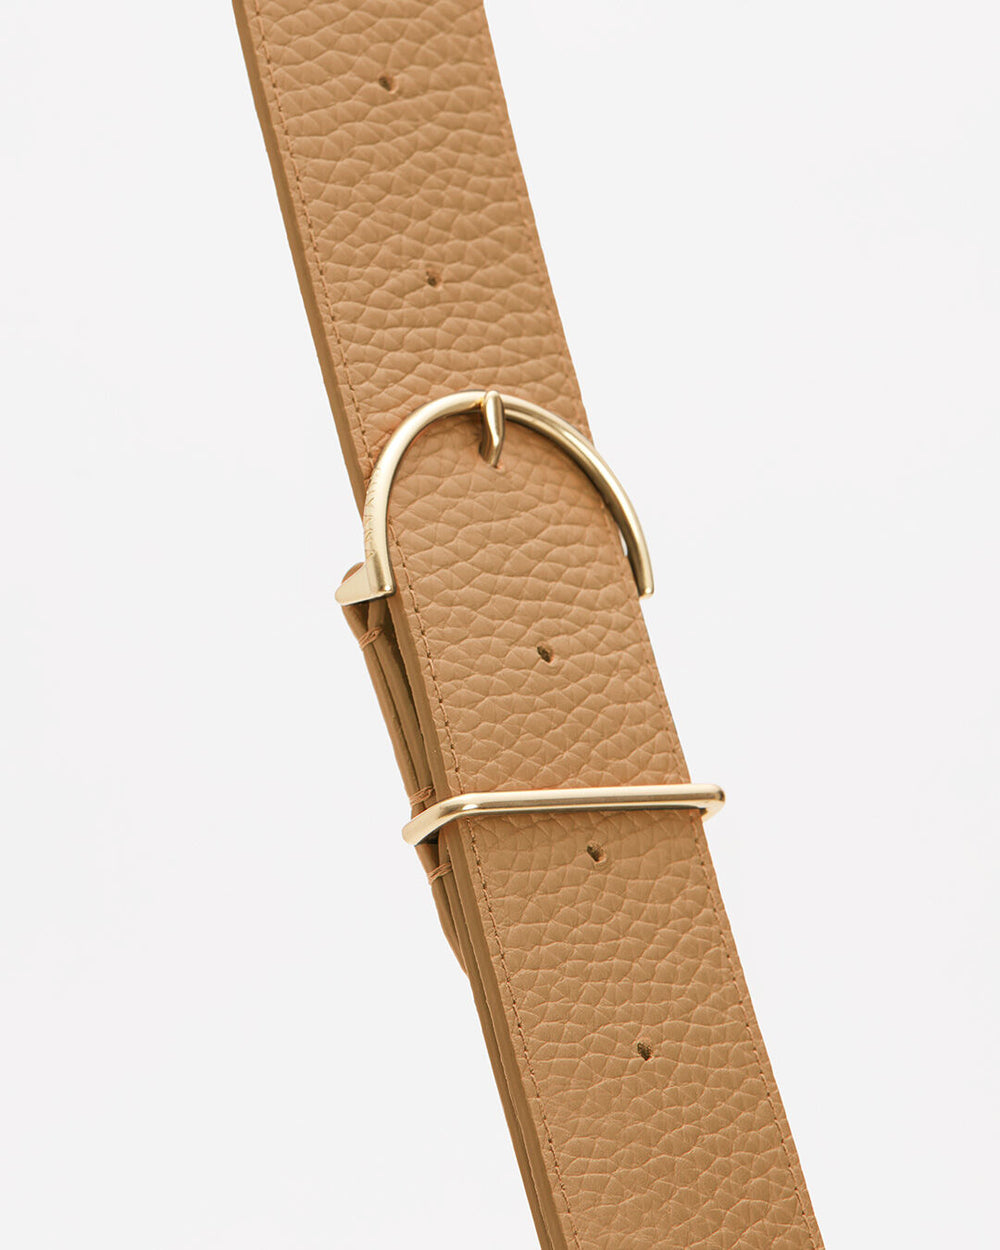 Close-up view of a textured strap with a metal buckle and loop.